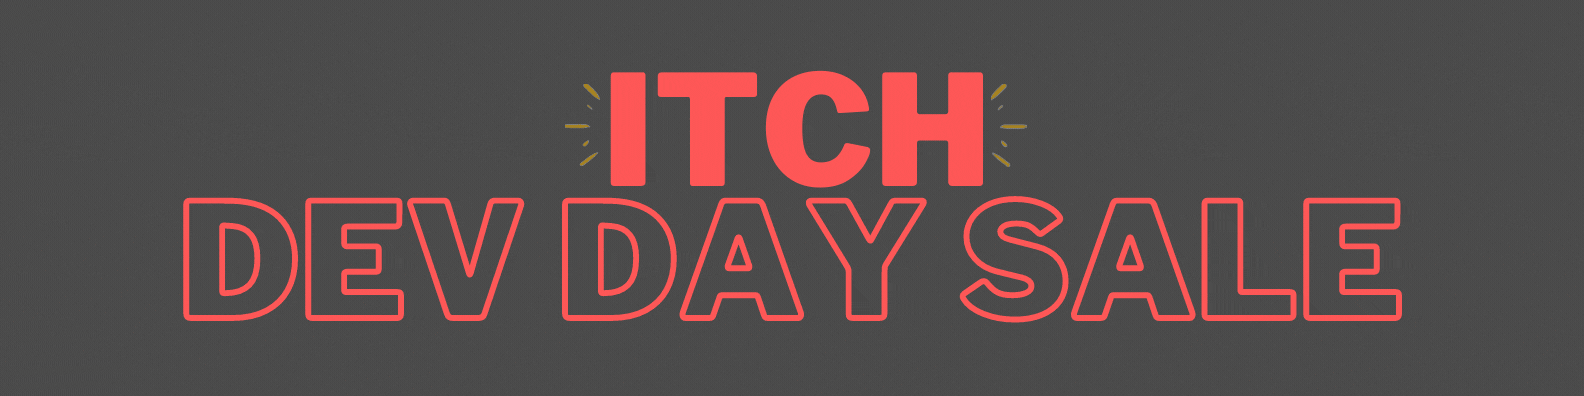 ITCH DEVELOPER DAY COLLECTION!